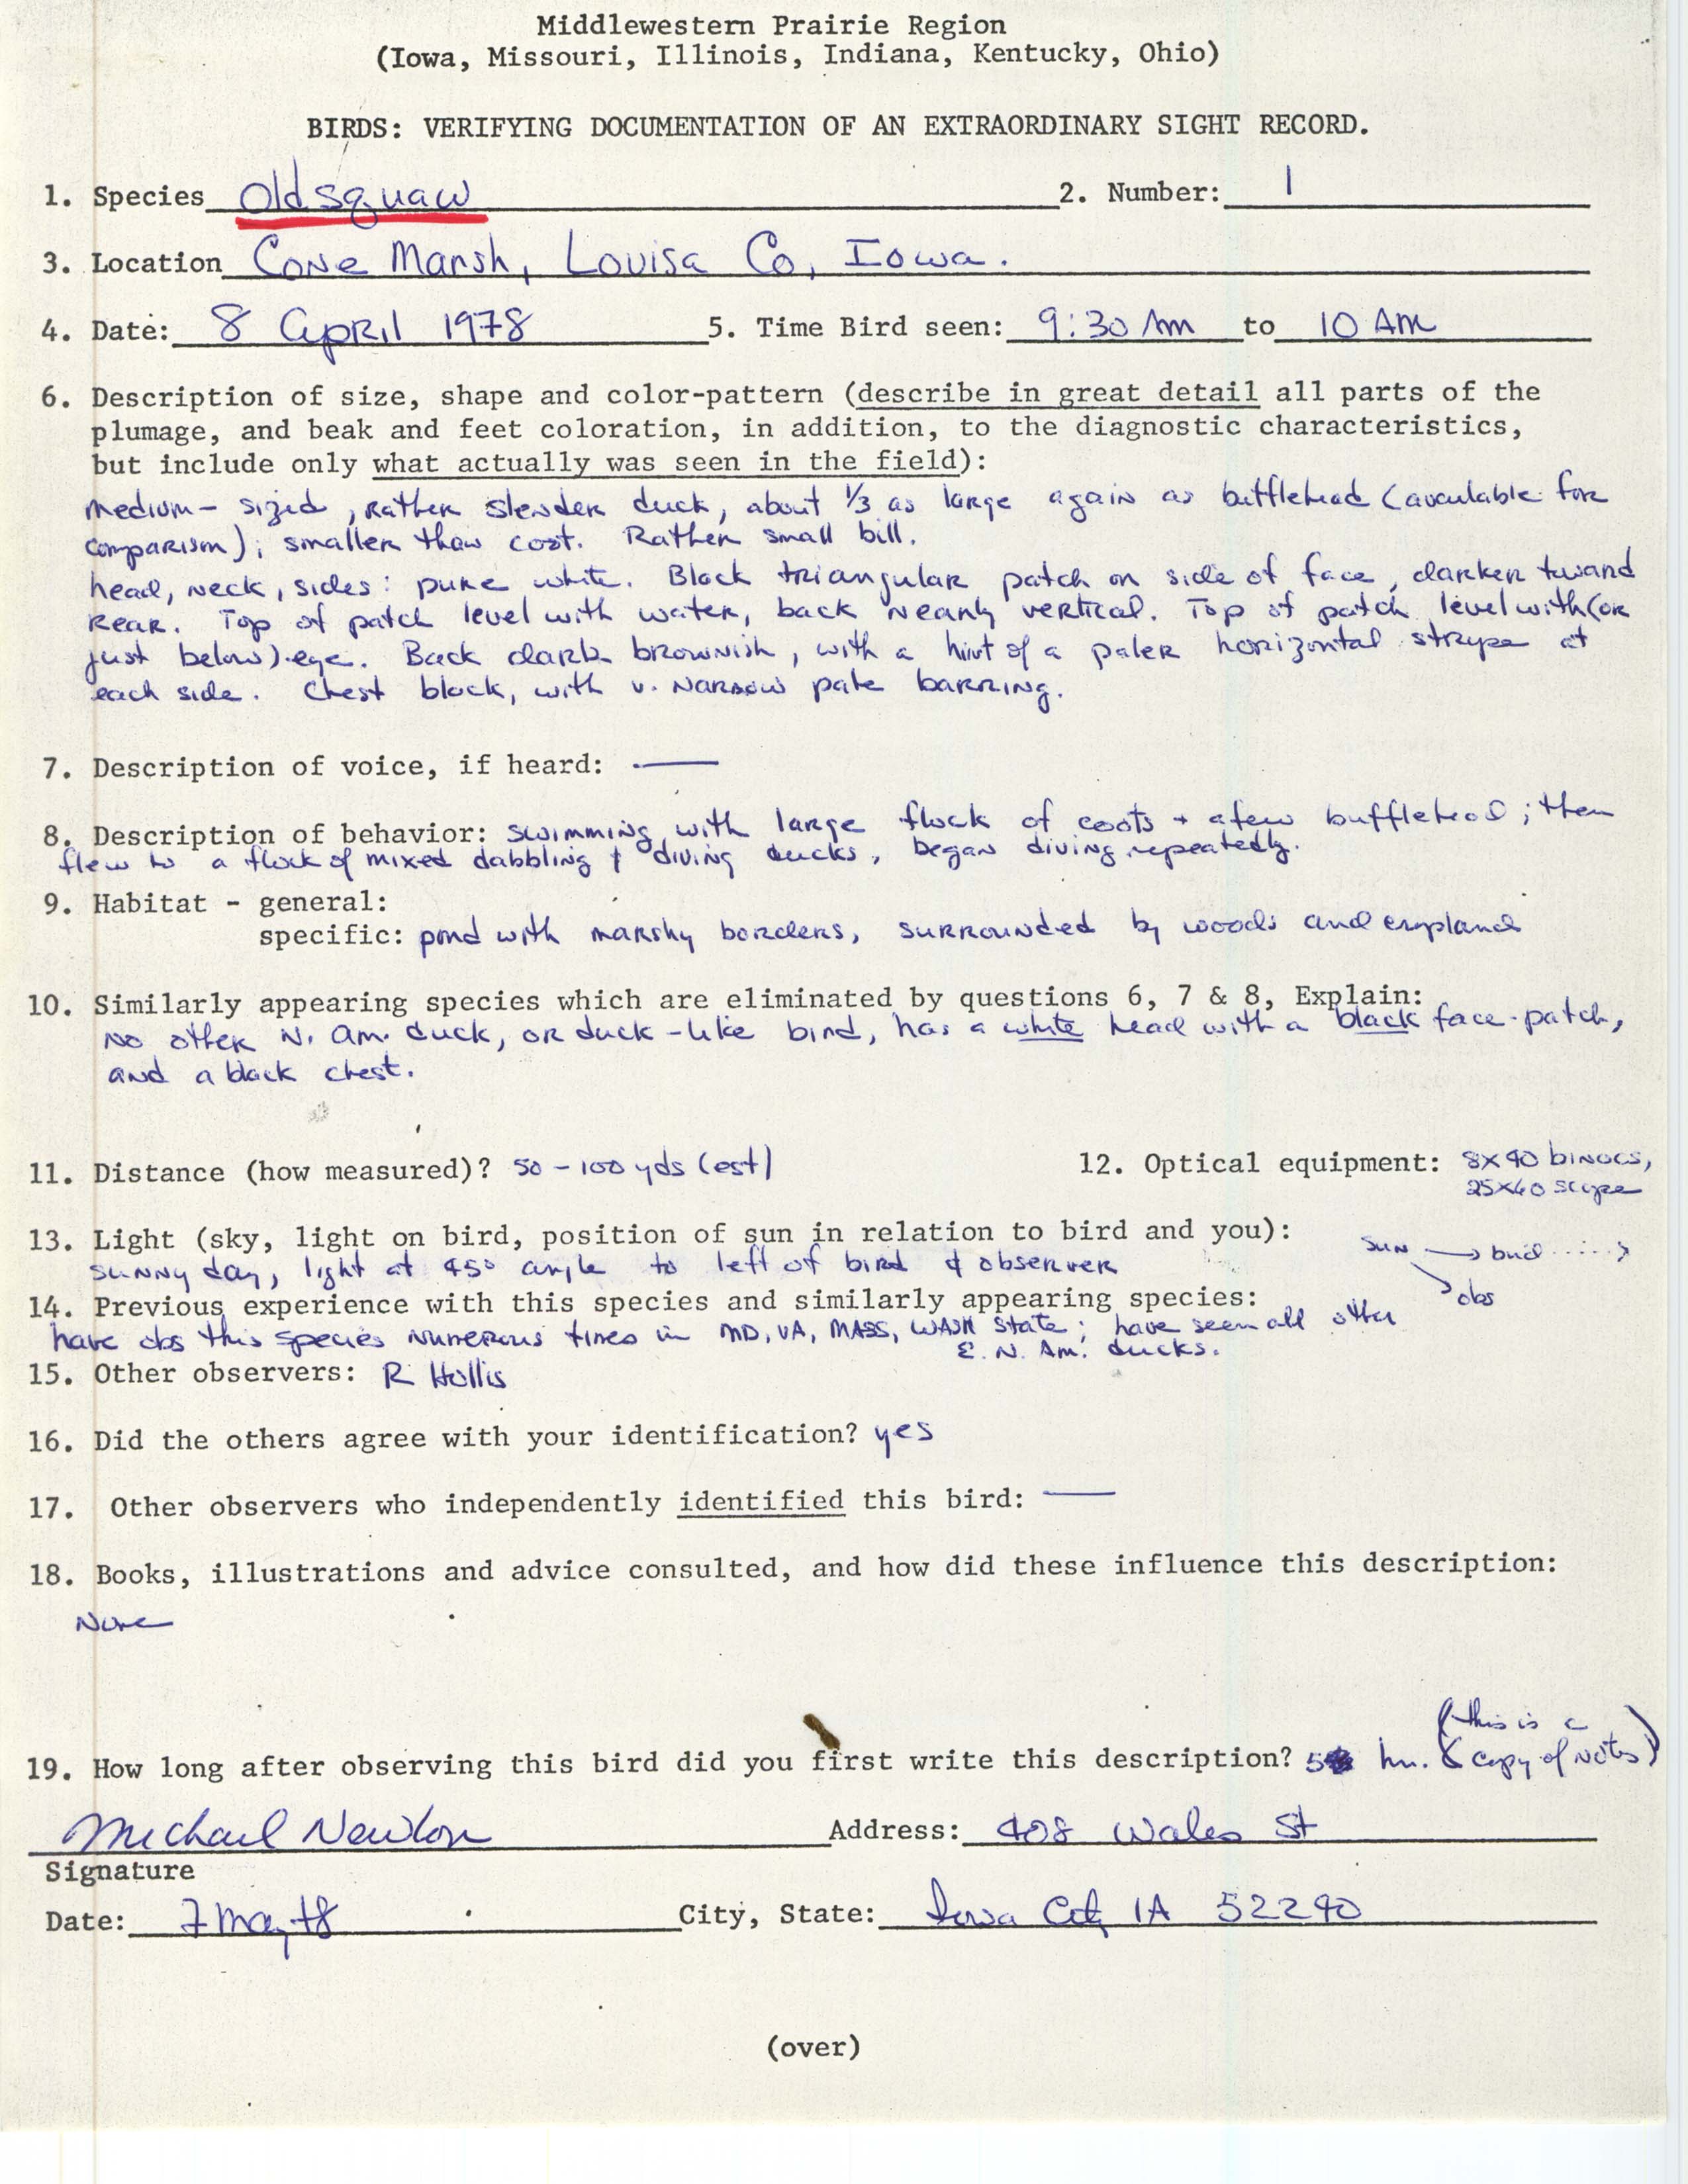 Rare bird documentation form for Long-tailed Duck at Cone Marsh, 1978